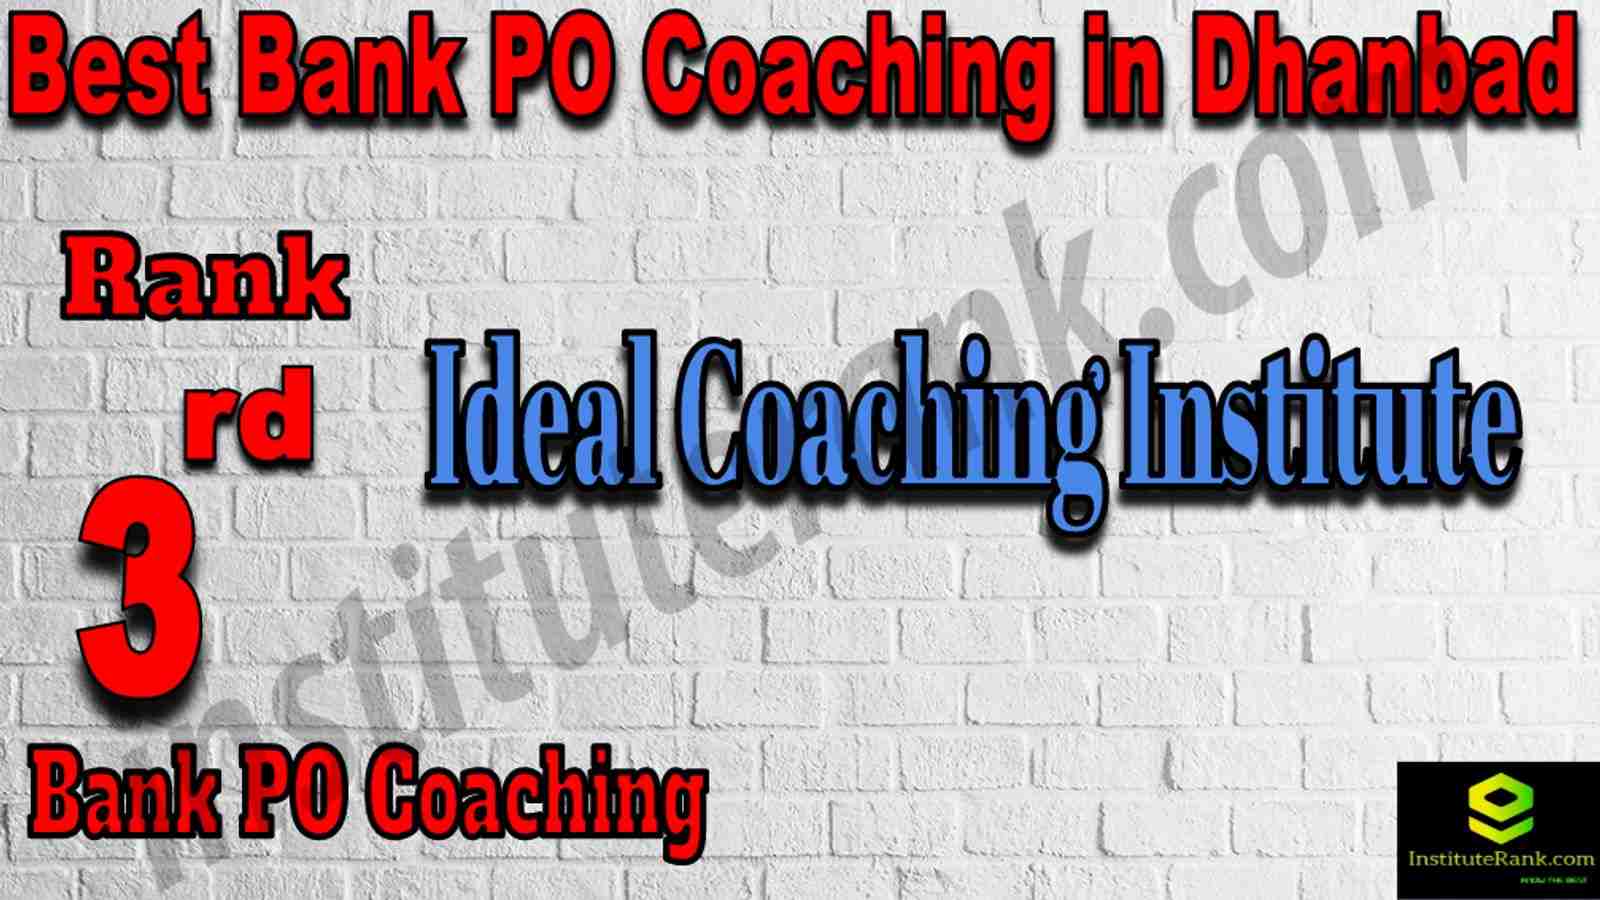 3rd Best Bank PO Coaching in Dhanbad